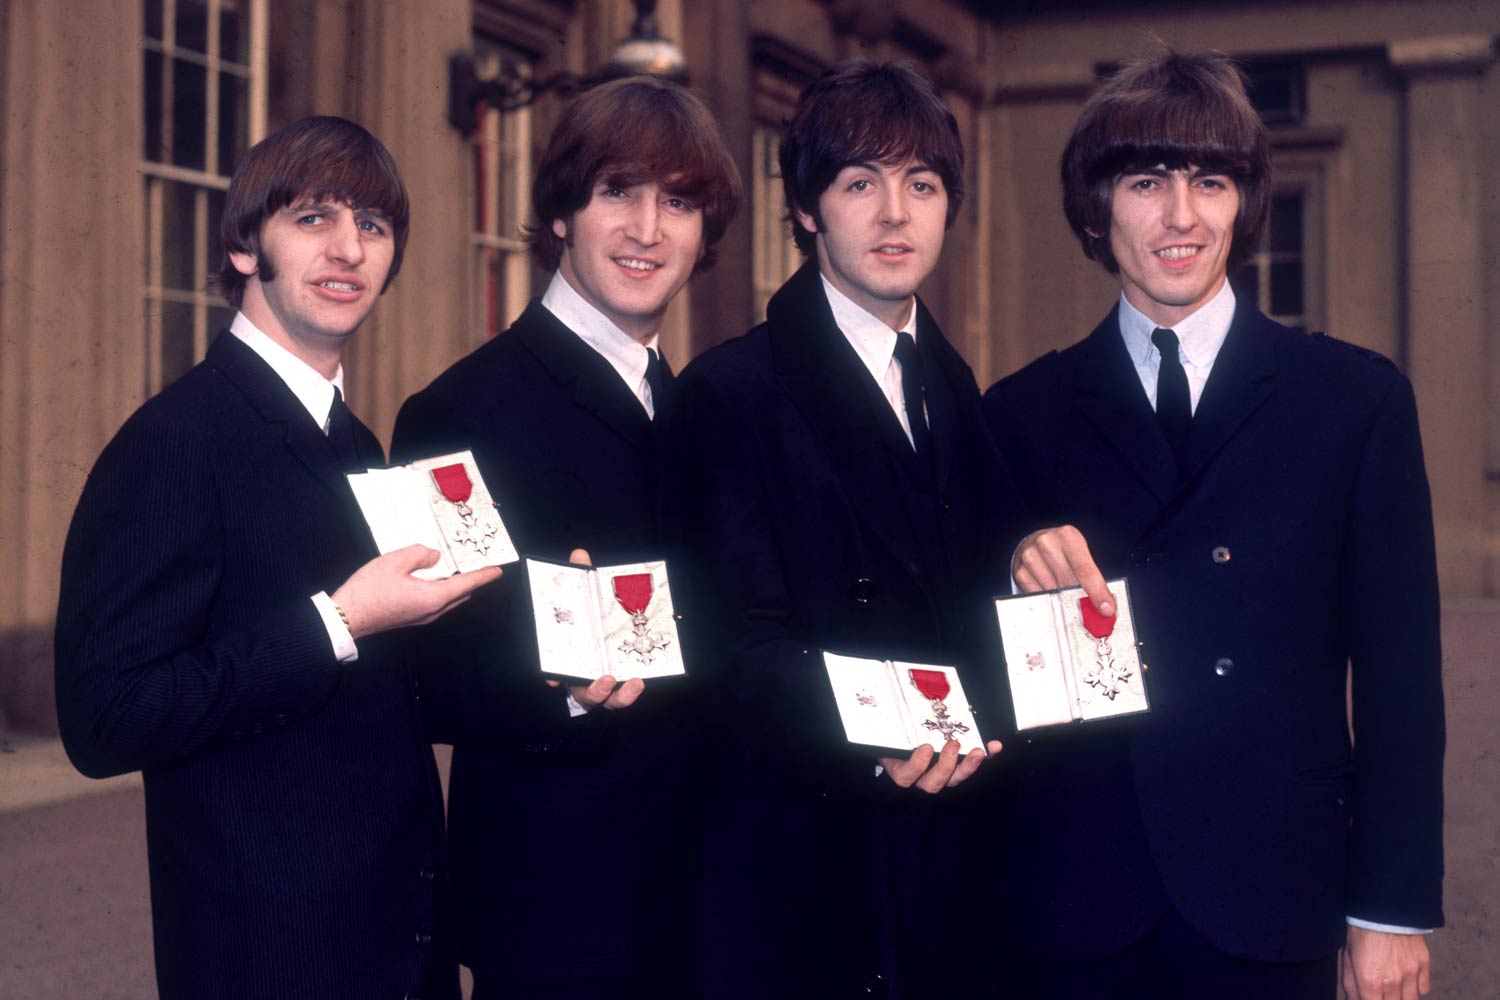 The Beatles in dark suits and black ties pose together, each one holding a medal in a small box.